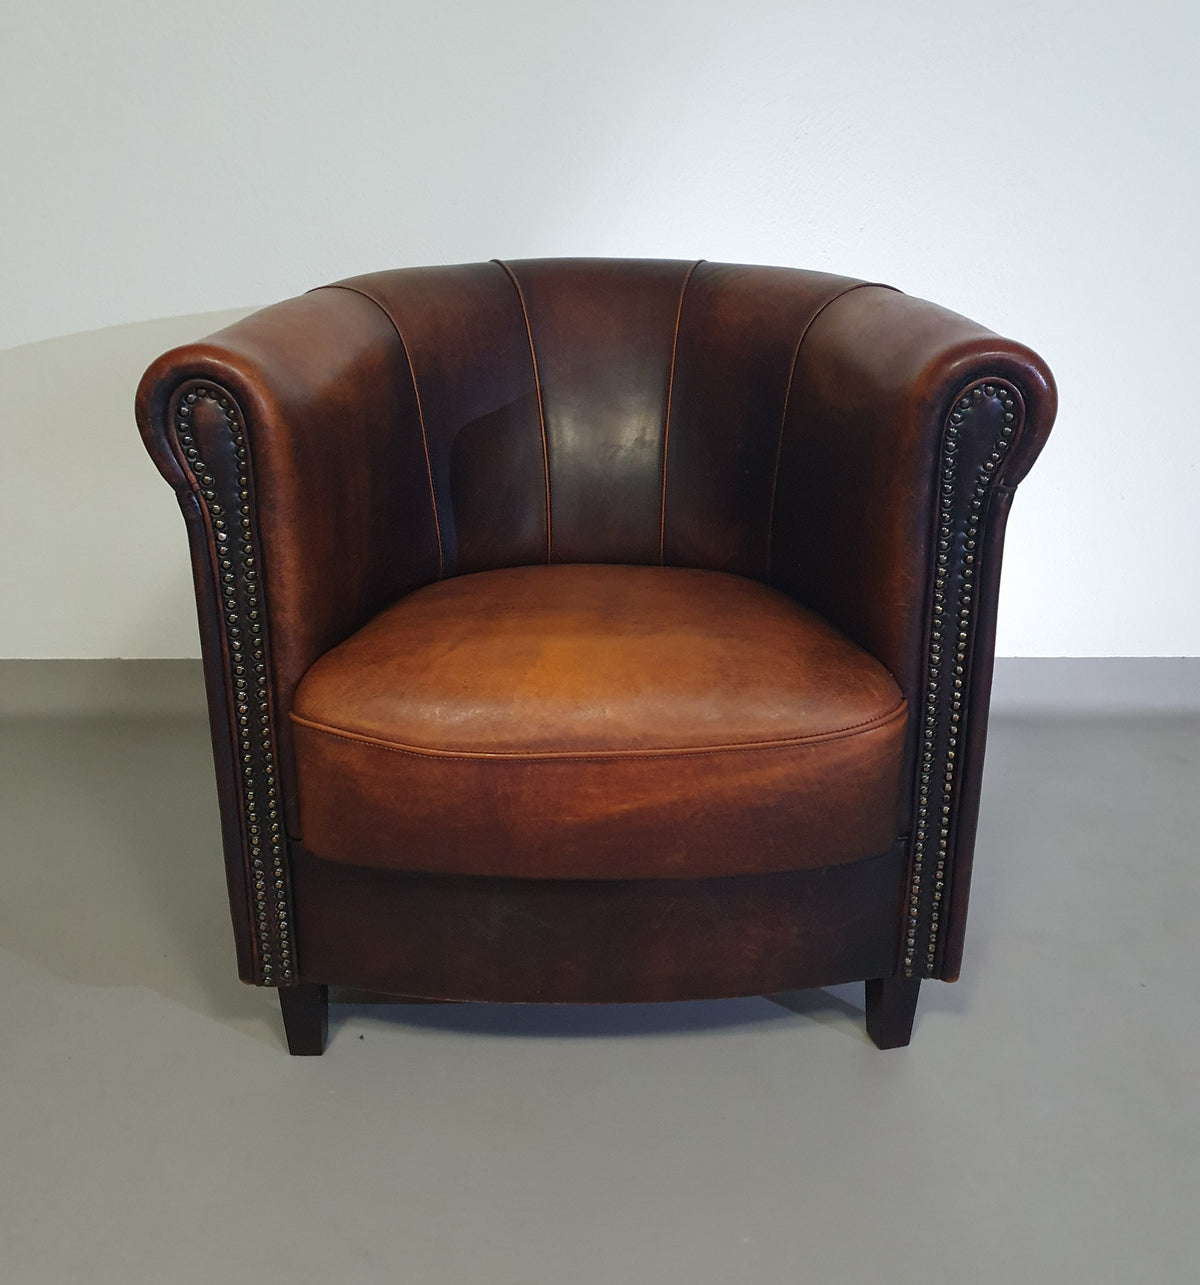 2 x Beautiful subtly designed sheep leather club chair from the Joris brand